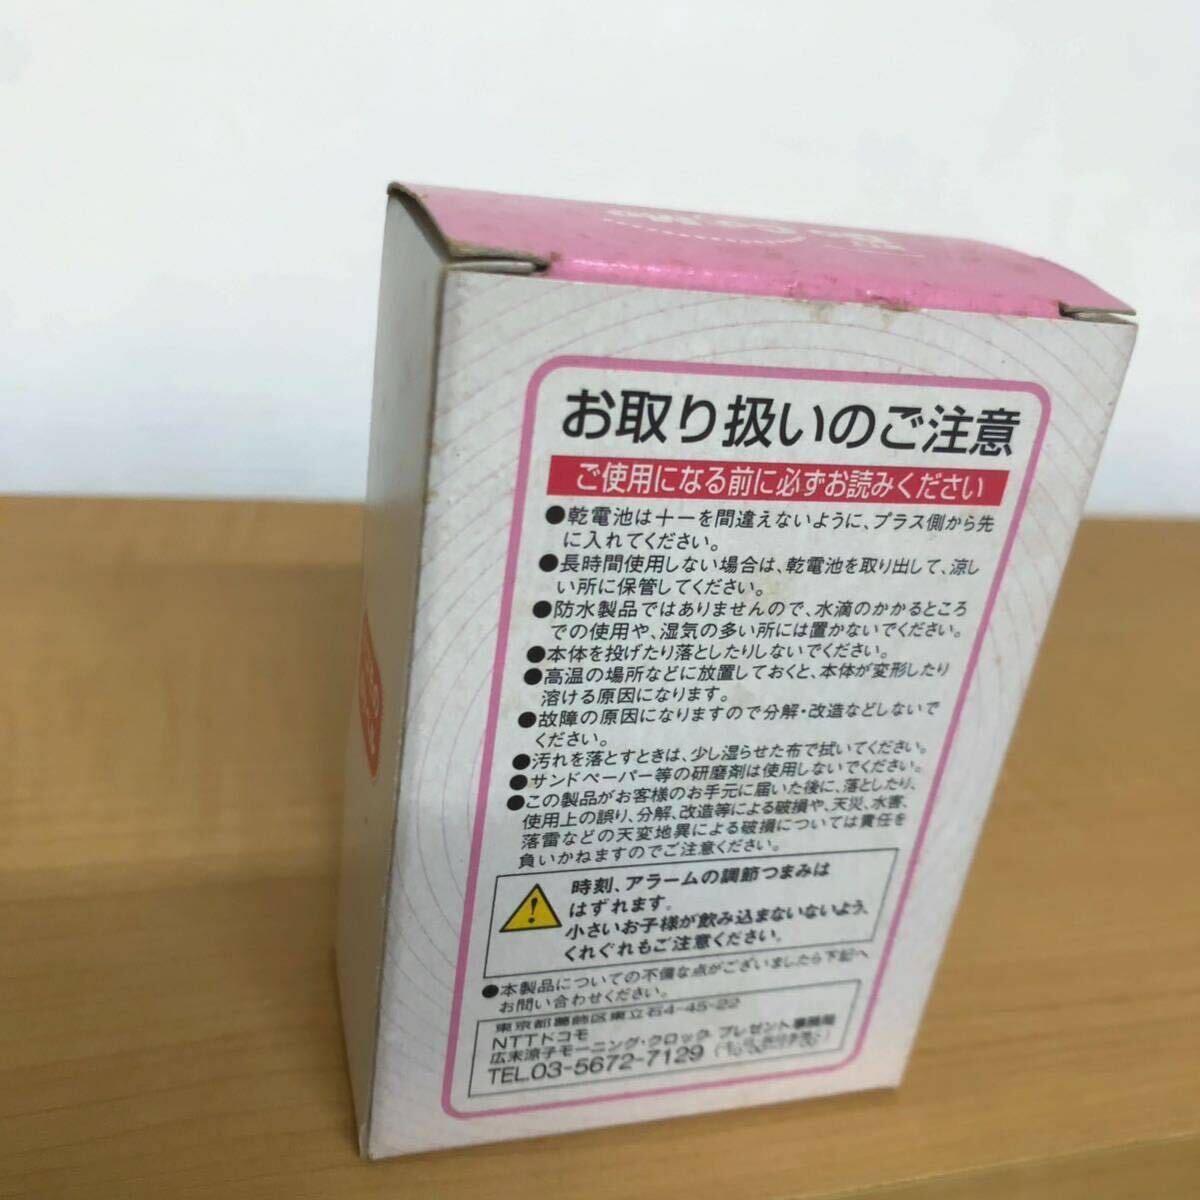  Hirosue Ryouko not for sale 90 period DoCoMo unused body beautiful goods outer box aged deterioration equipped rare valuable that time thing 